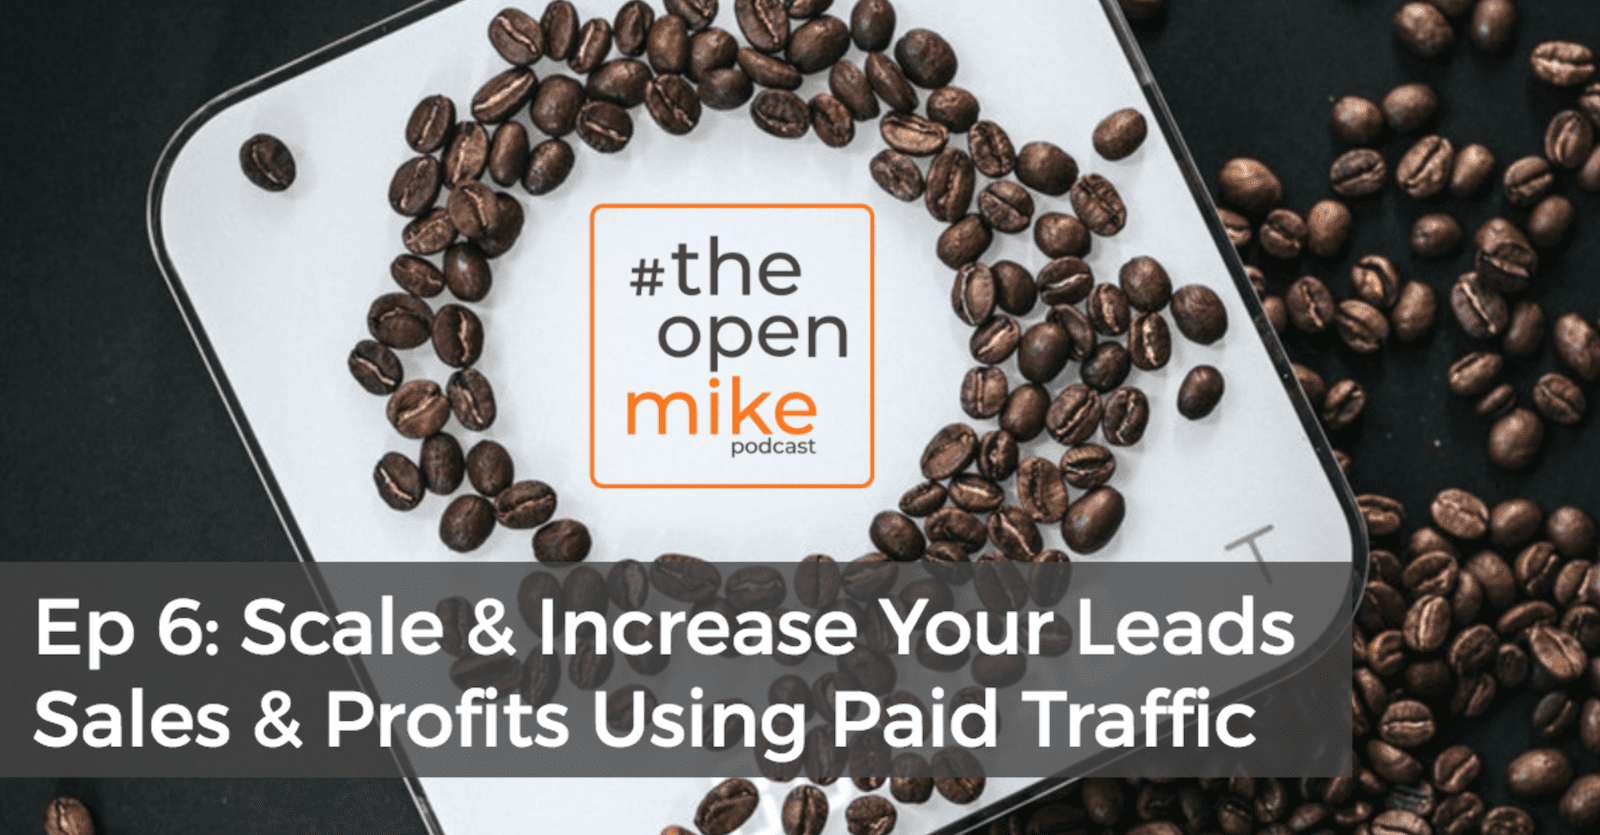 Scale & Increase Your Leads Sales & Profits Using Paid Traffic